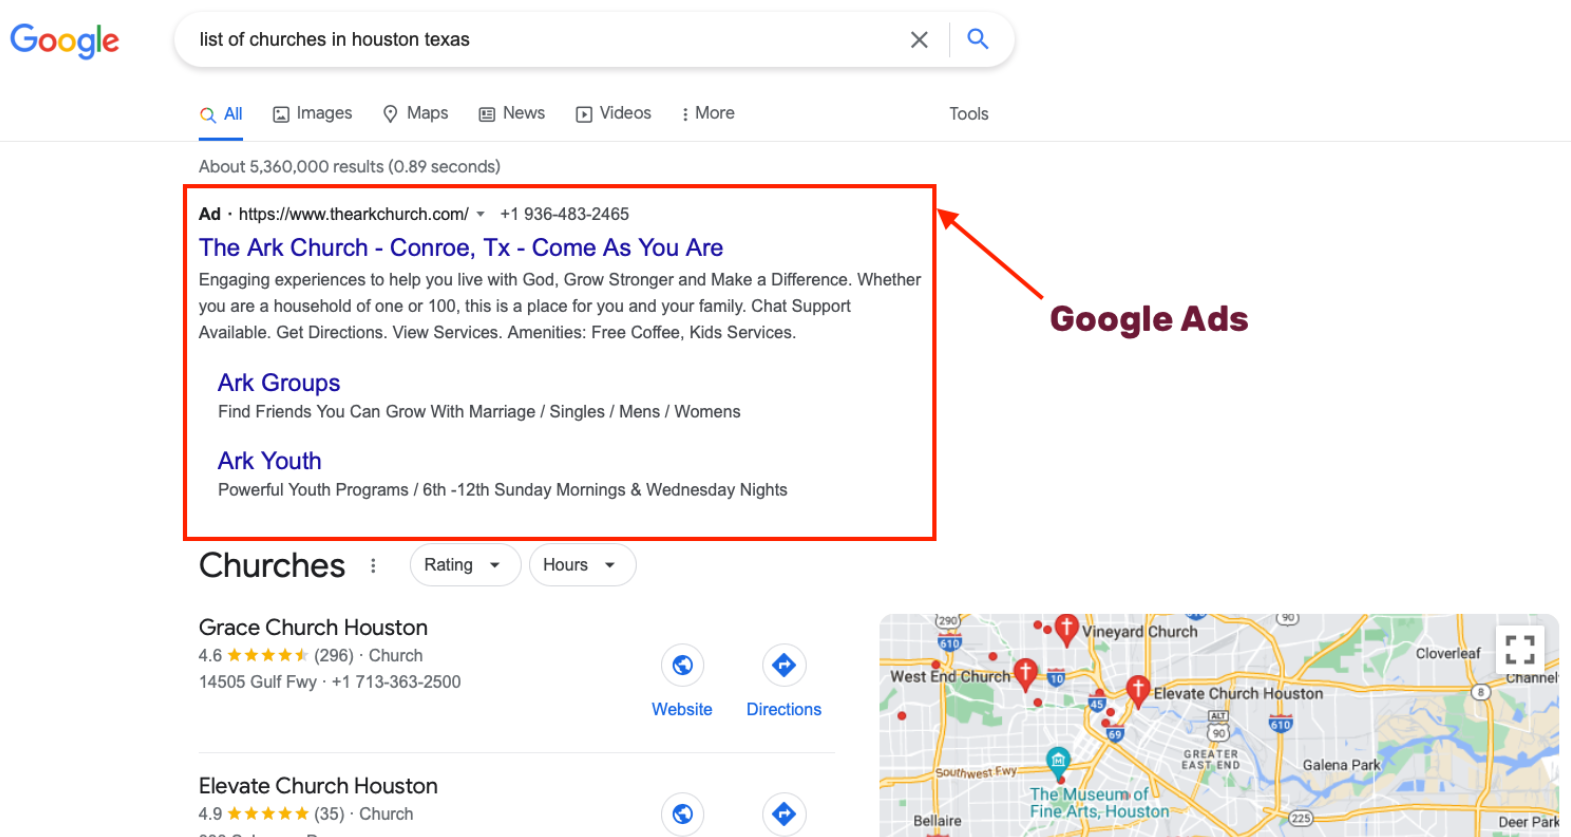 Google Ads Grant for Churches